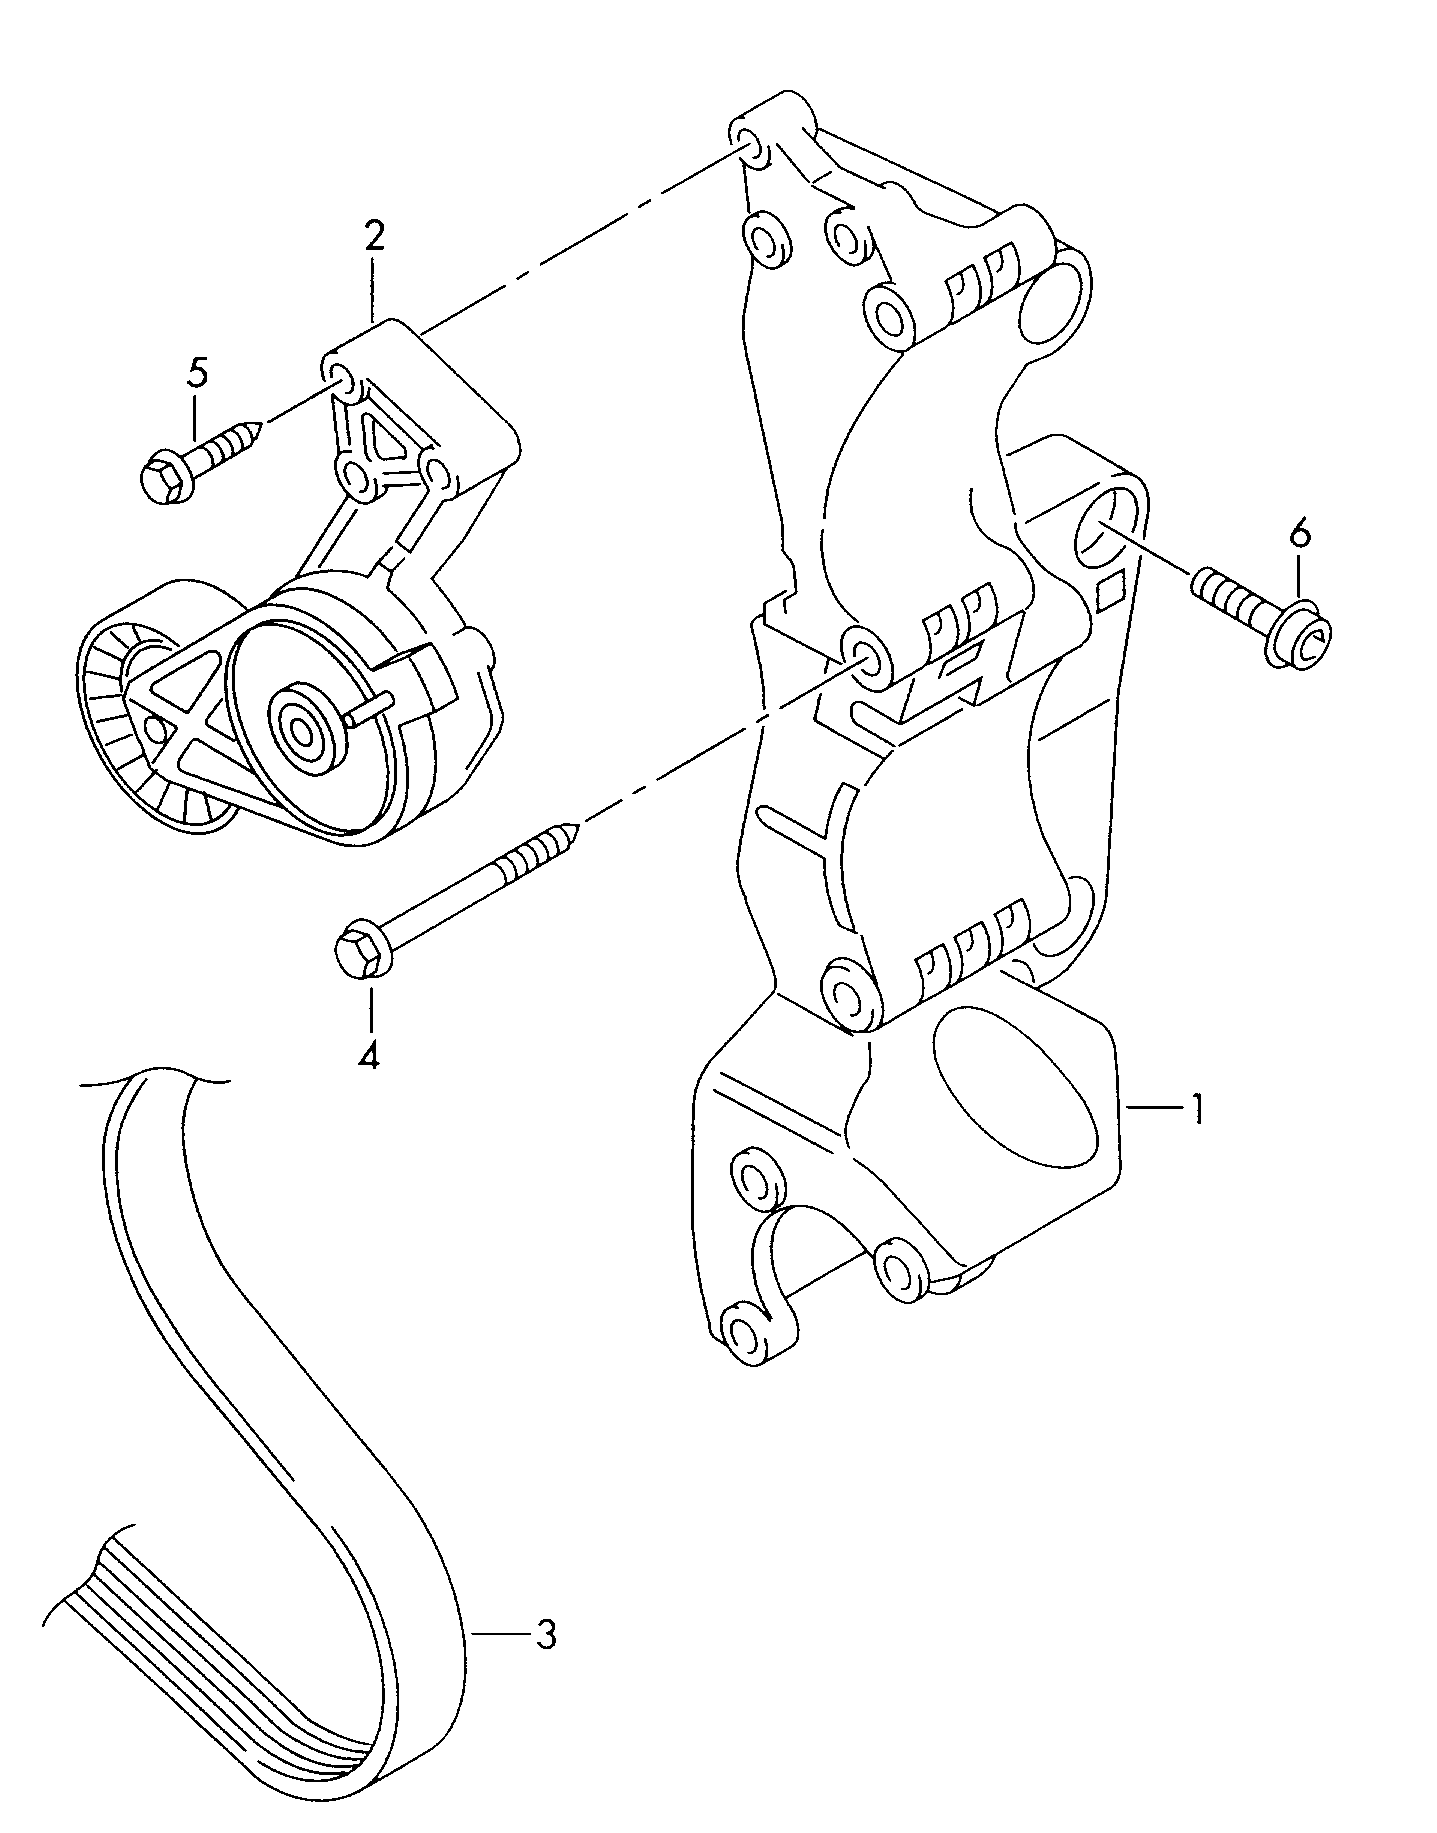 connecting and mounting parts<br>for alternatorPoly-V-belt 2.0 Ltr. - Octavia - oct